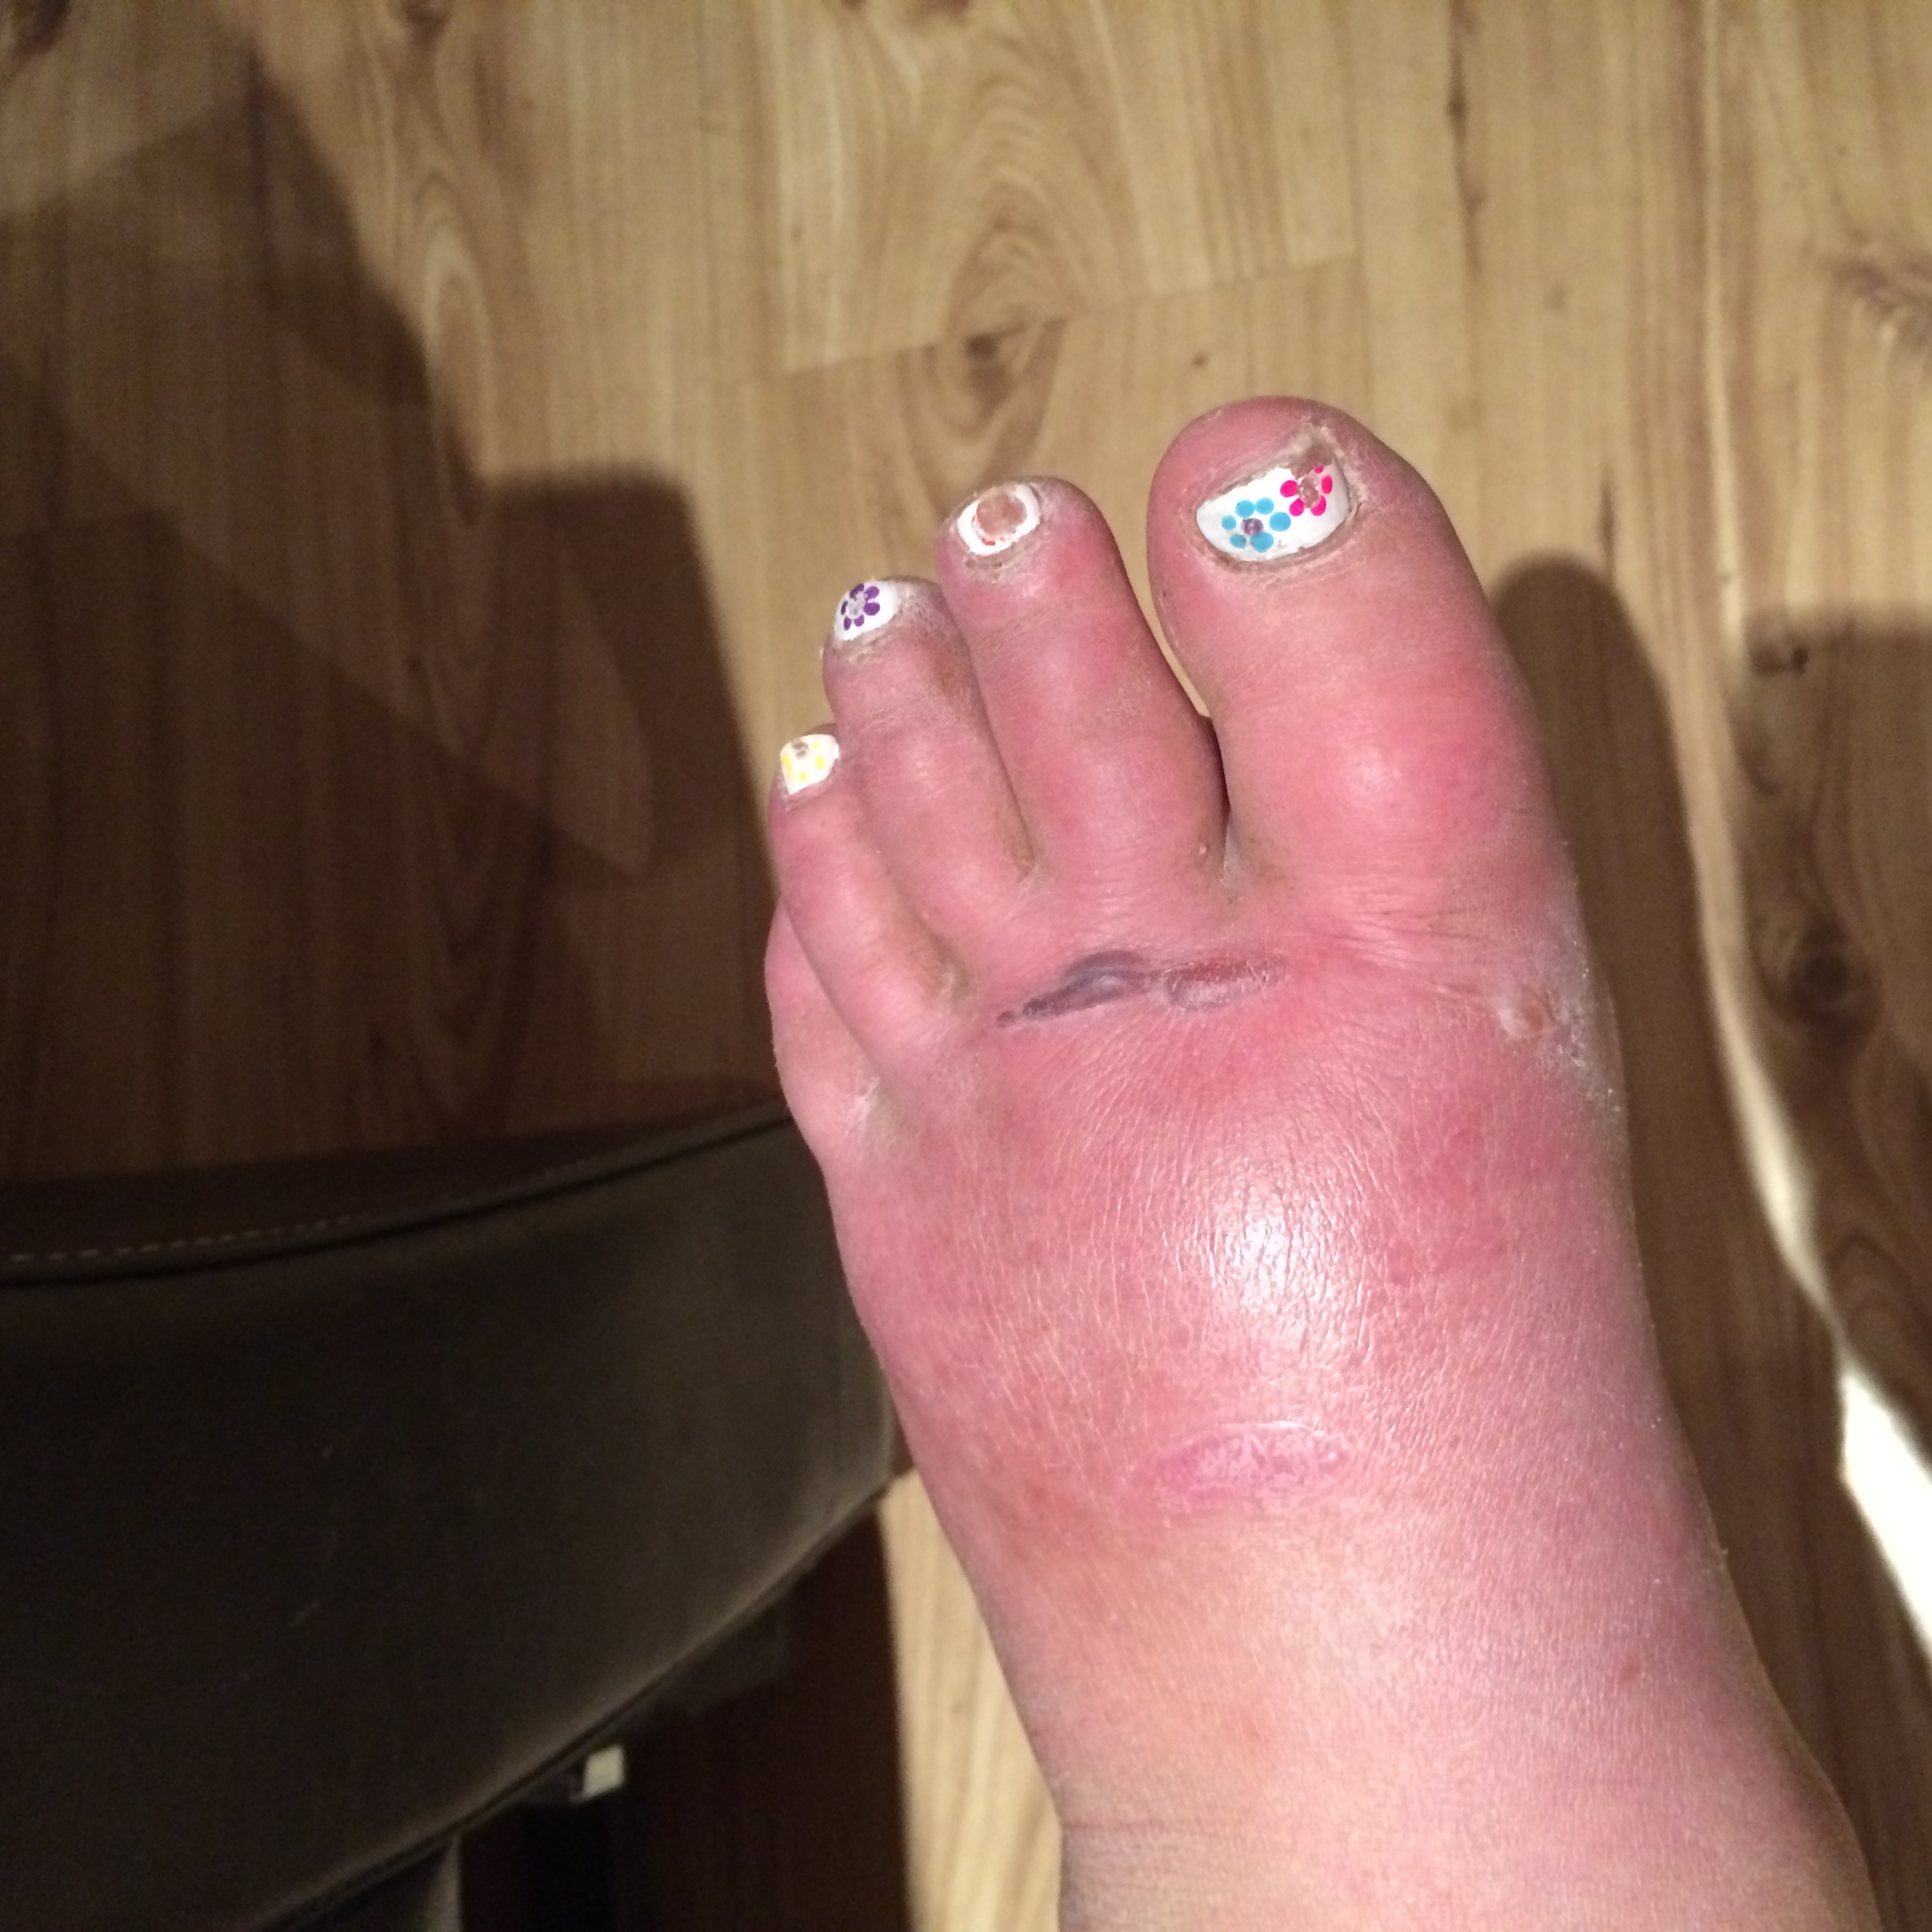 Stage 1 & 2 the skin is swollen with colour & temperature changes with blisters forming near the base of the toes